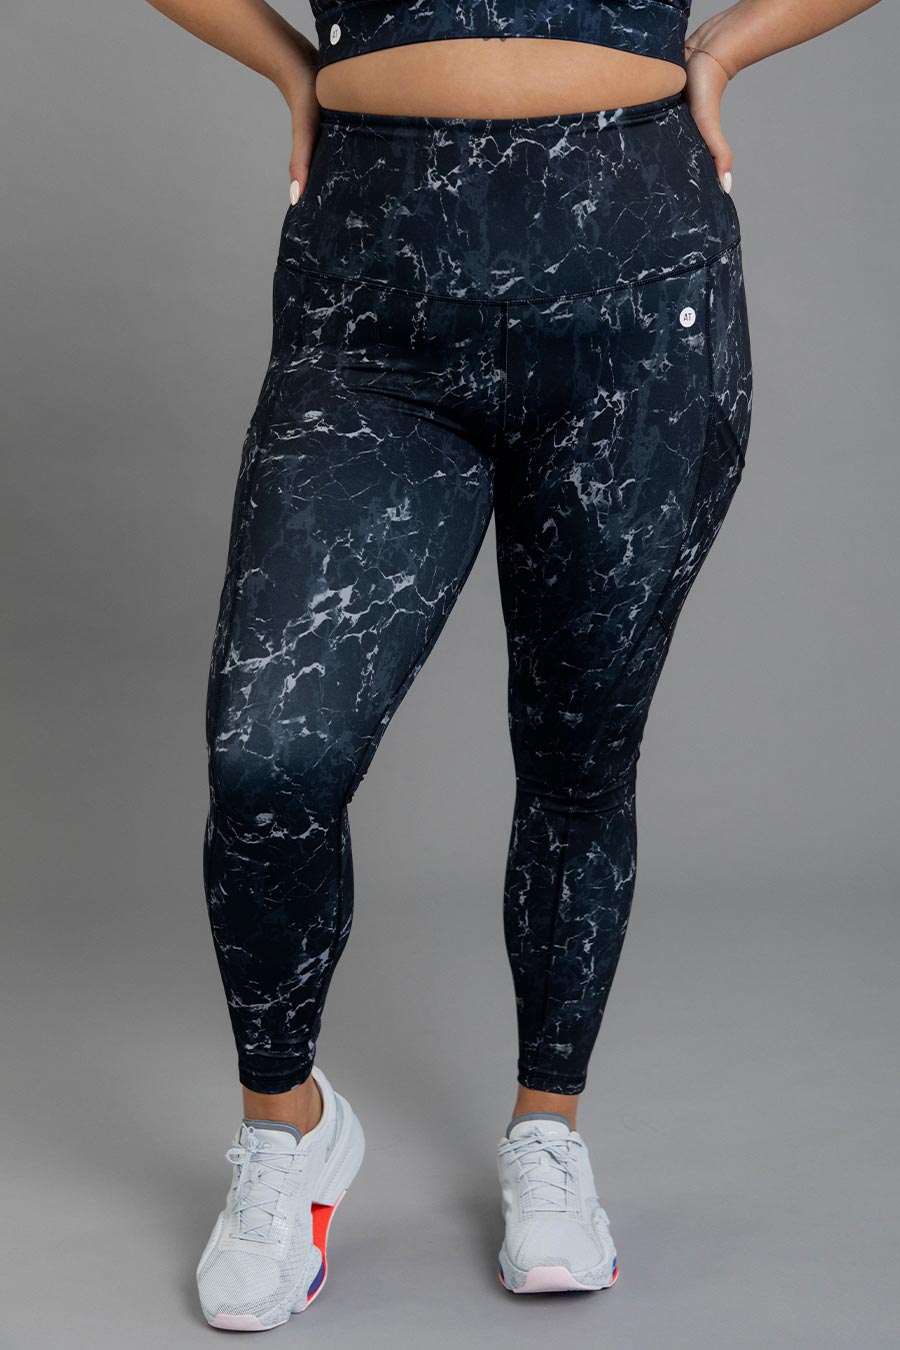 Smart Pocket Full Length Tight - Marbled from Active Truth™
